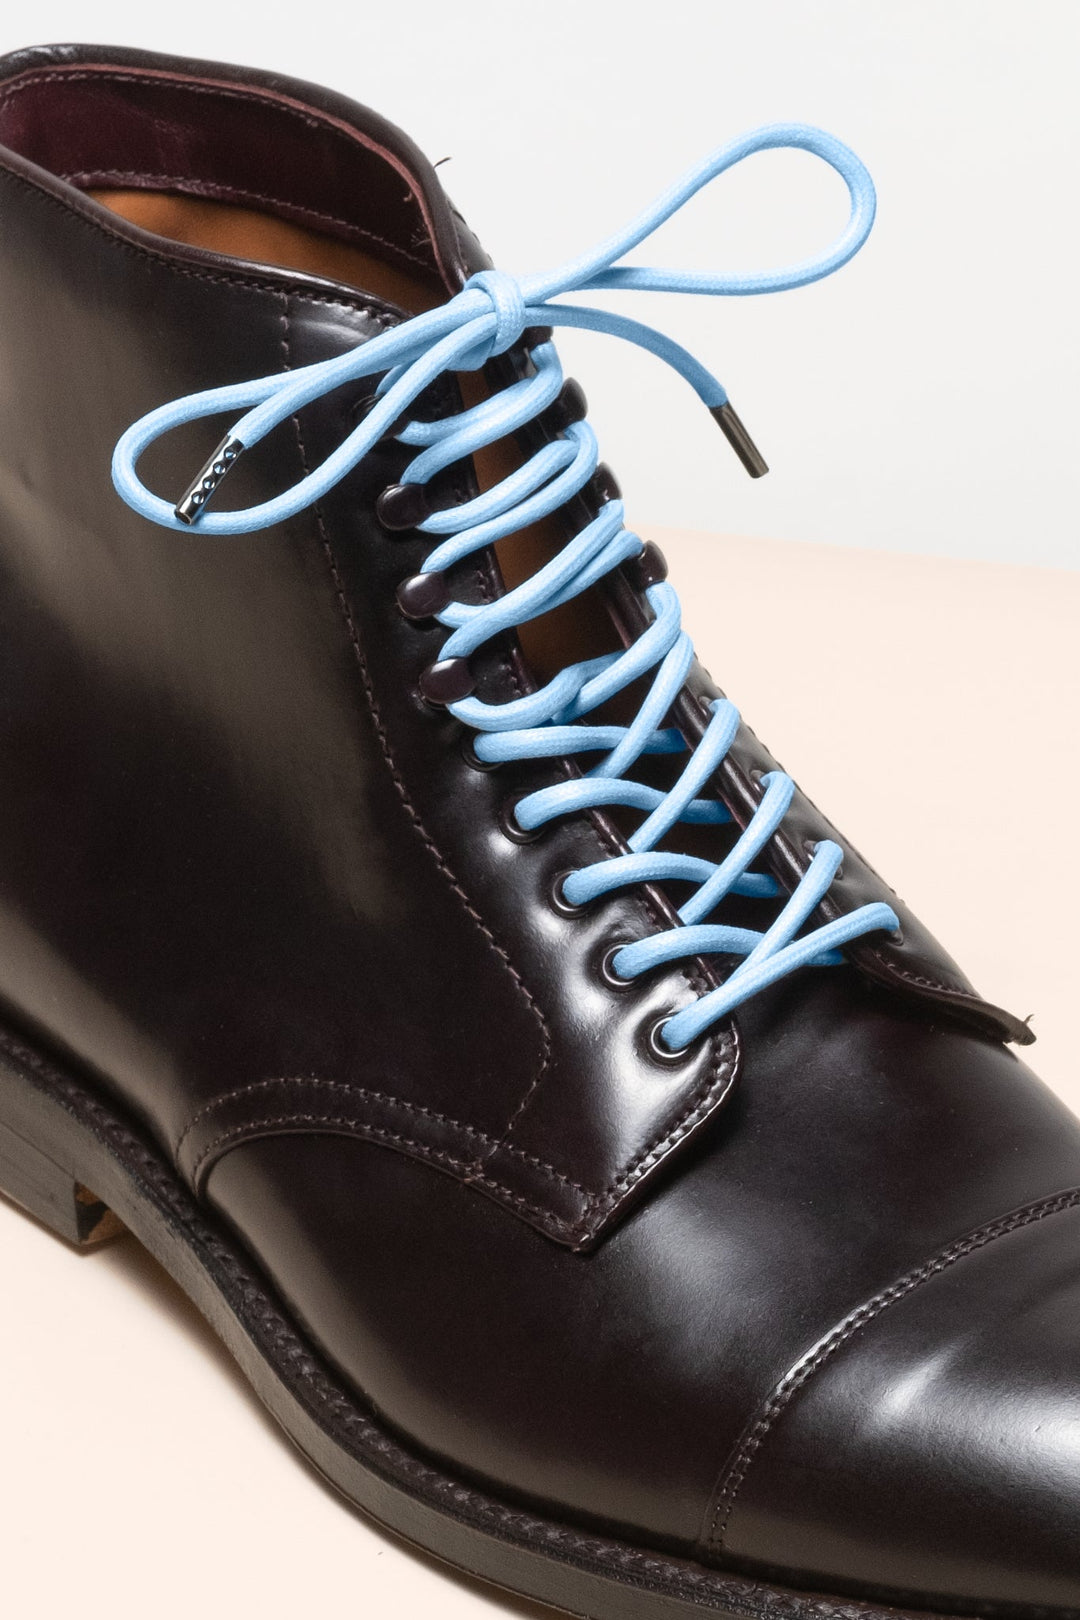 Light Blue - 4mm round waxed shoelaces for boots and shoes made from 100% organic cotton - Senkels